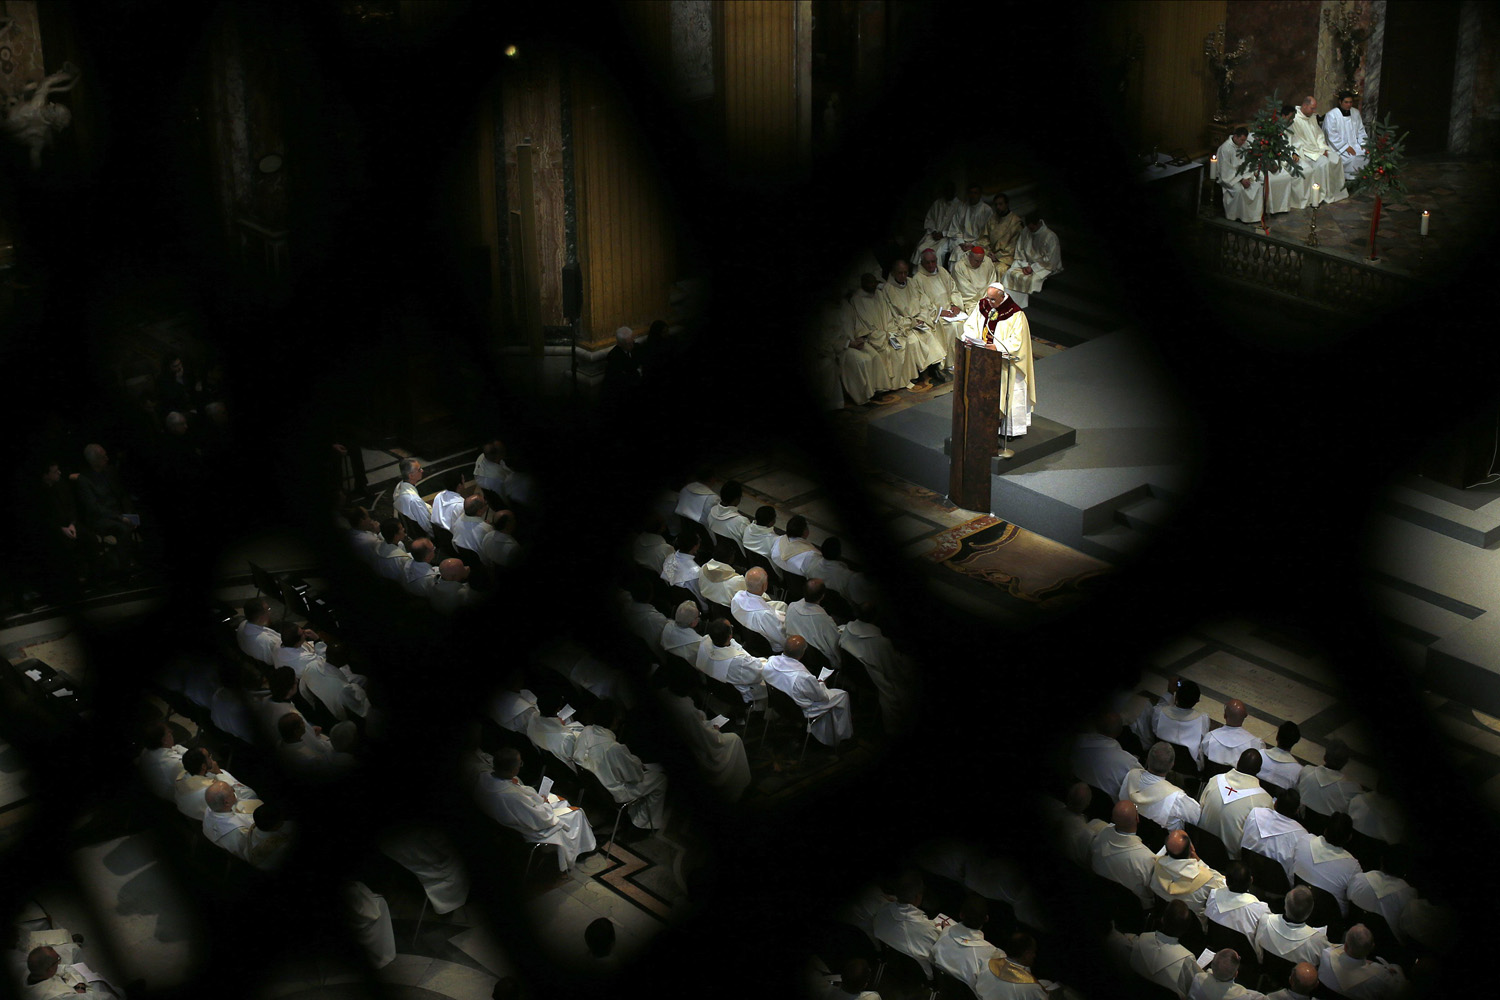 Pope Francis conducts a mass at the Church of the Most Holy Name of Jesus in downtown Rome